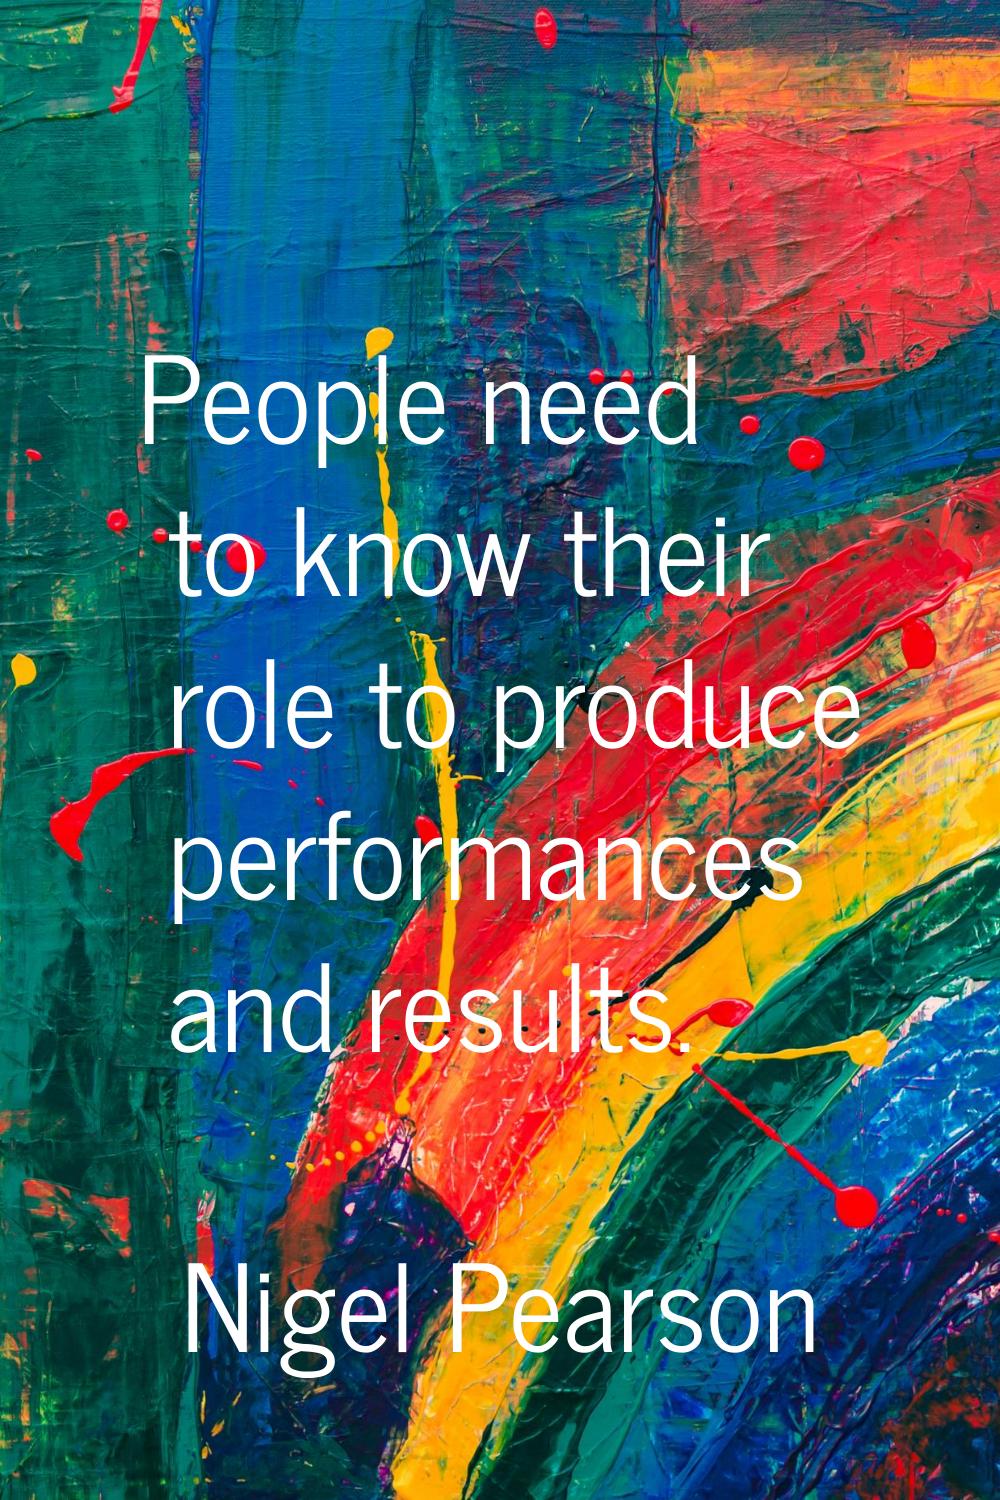 People need to know their role to produce performances and results.